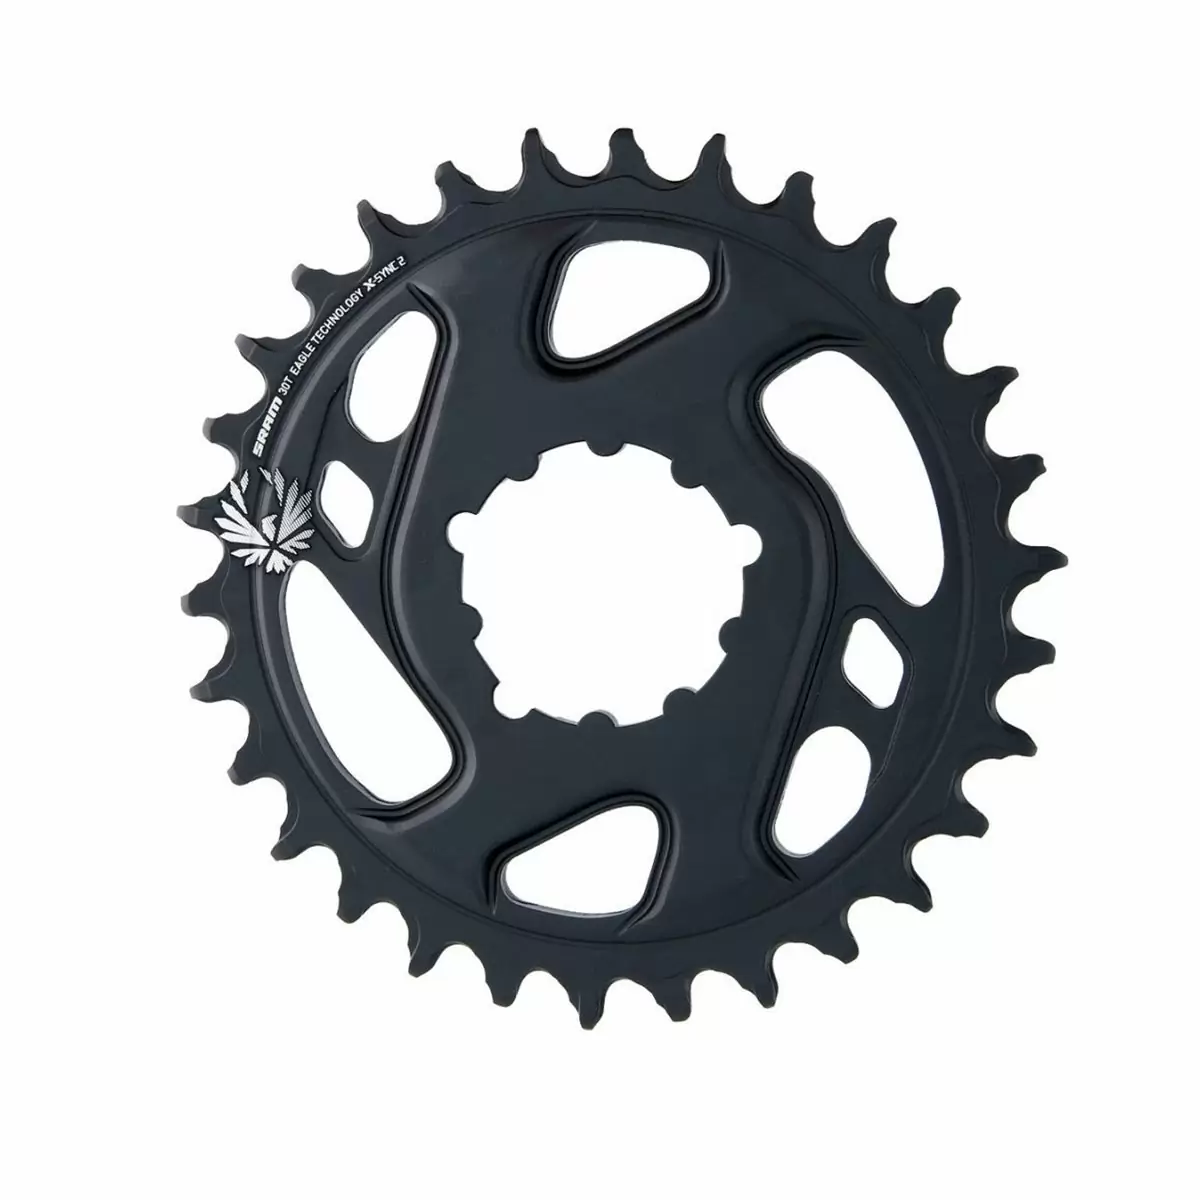 Chainring direct mount X-Sync 30t GX eagle 12v offset 6mm - image